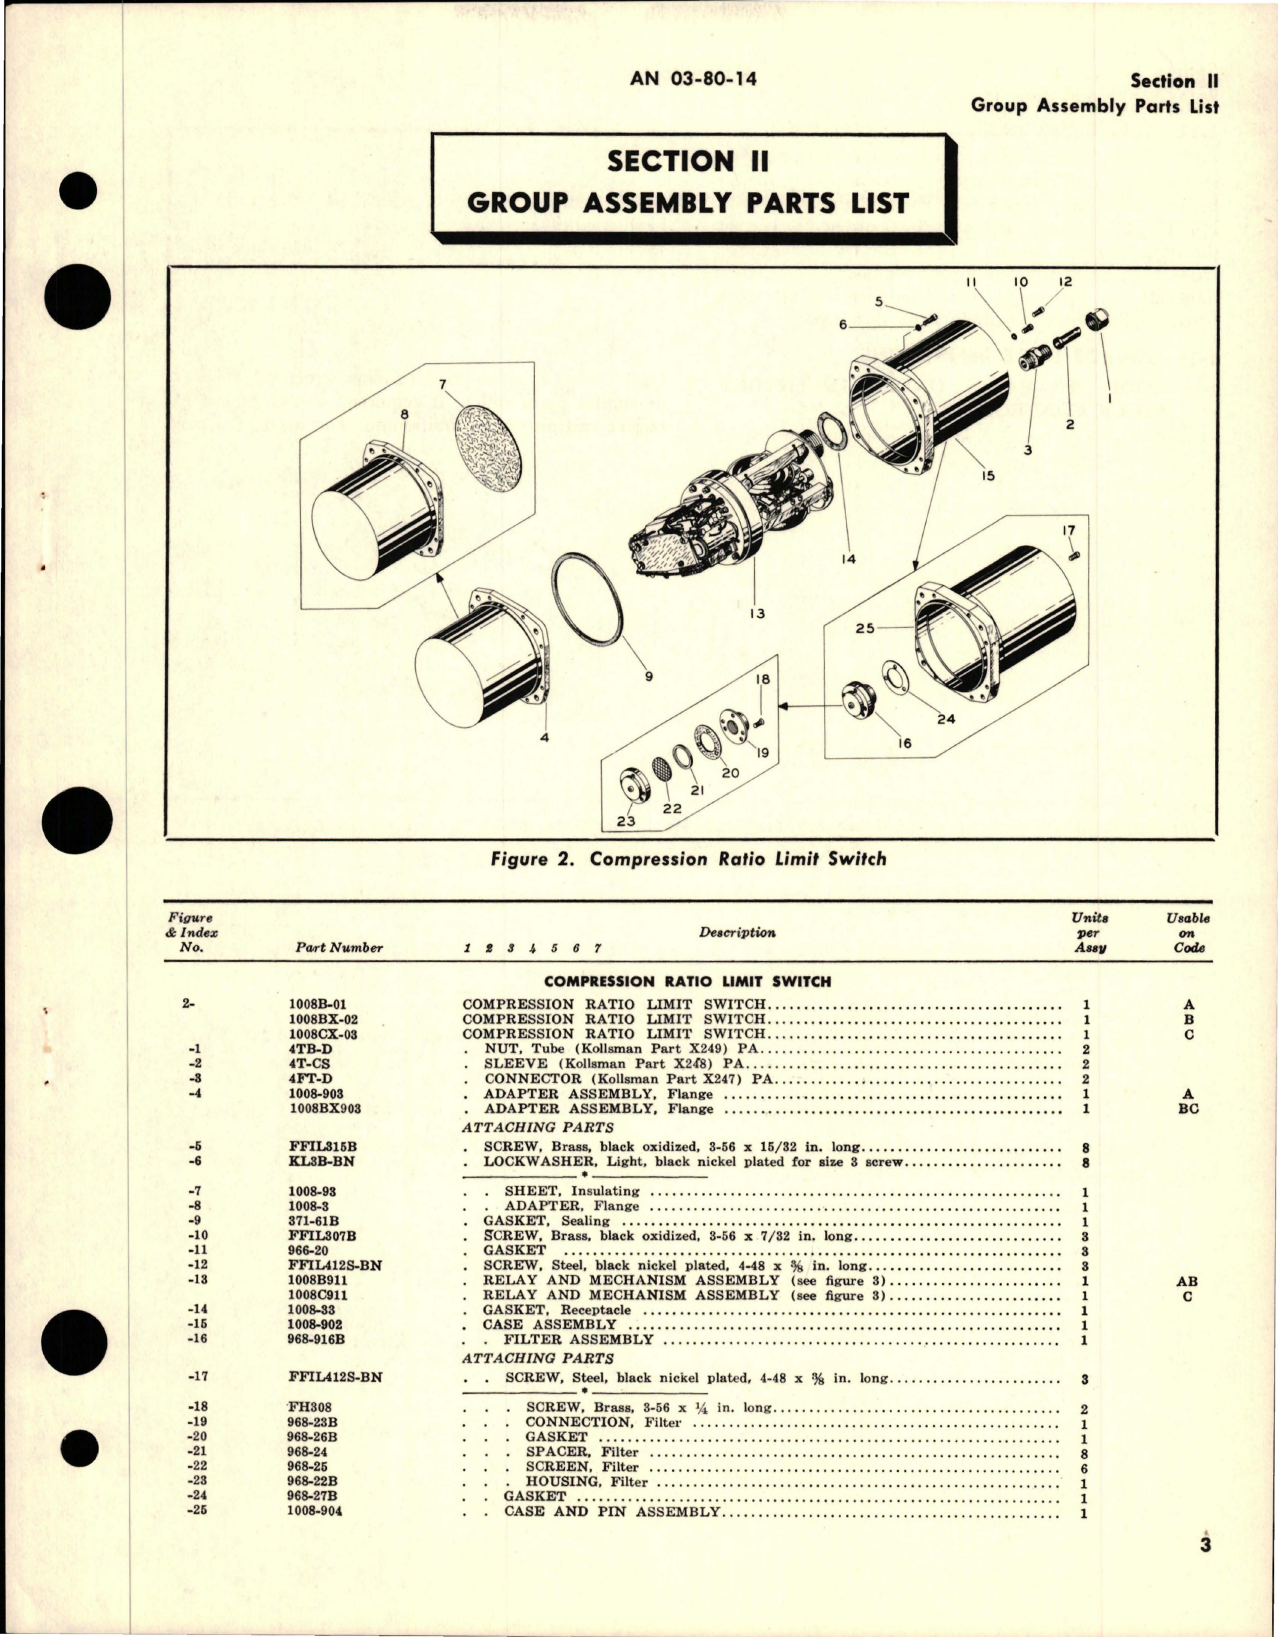 Sample page 5 from AirCorps Library document: Illustrated Parts Breakdown for Compression Ratio Limit Switch 